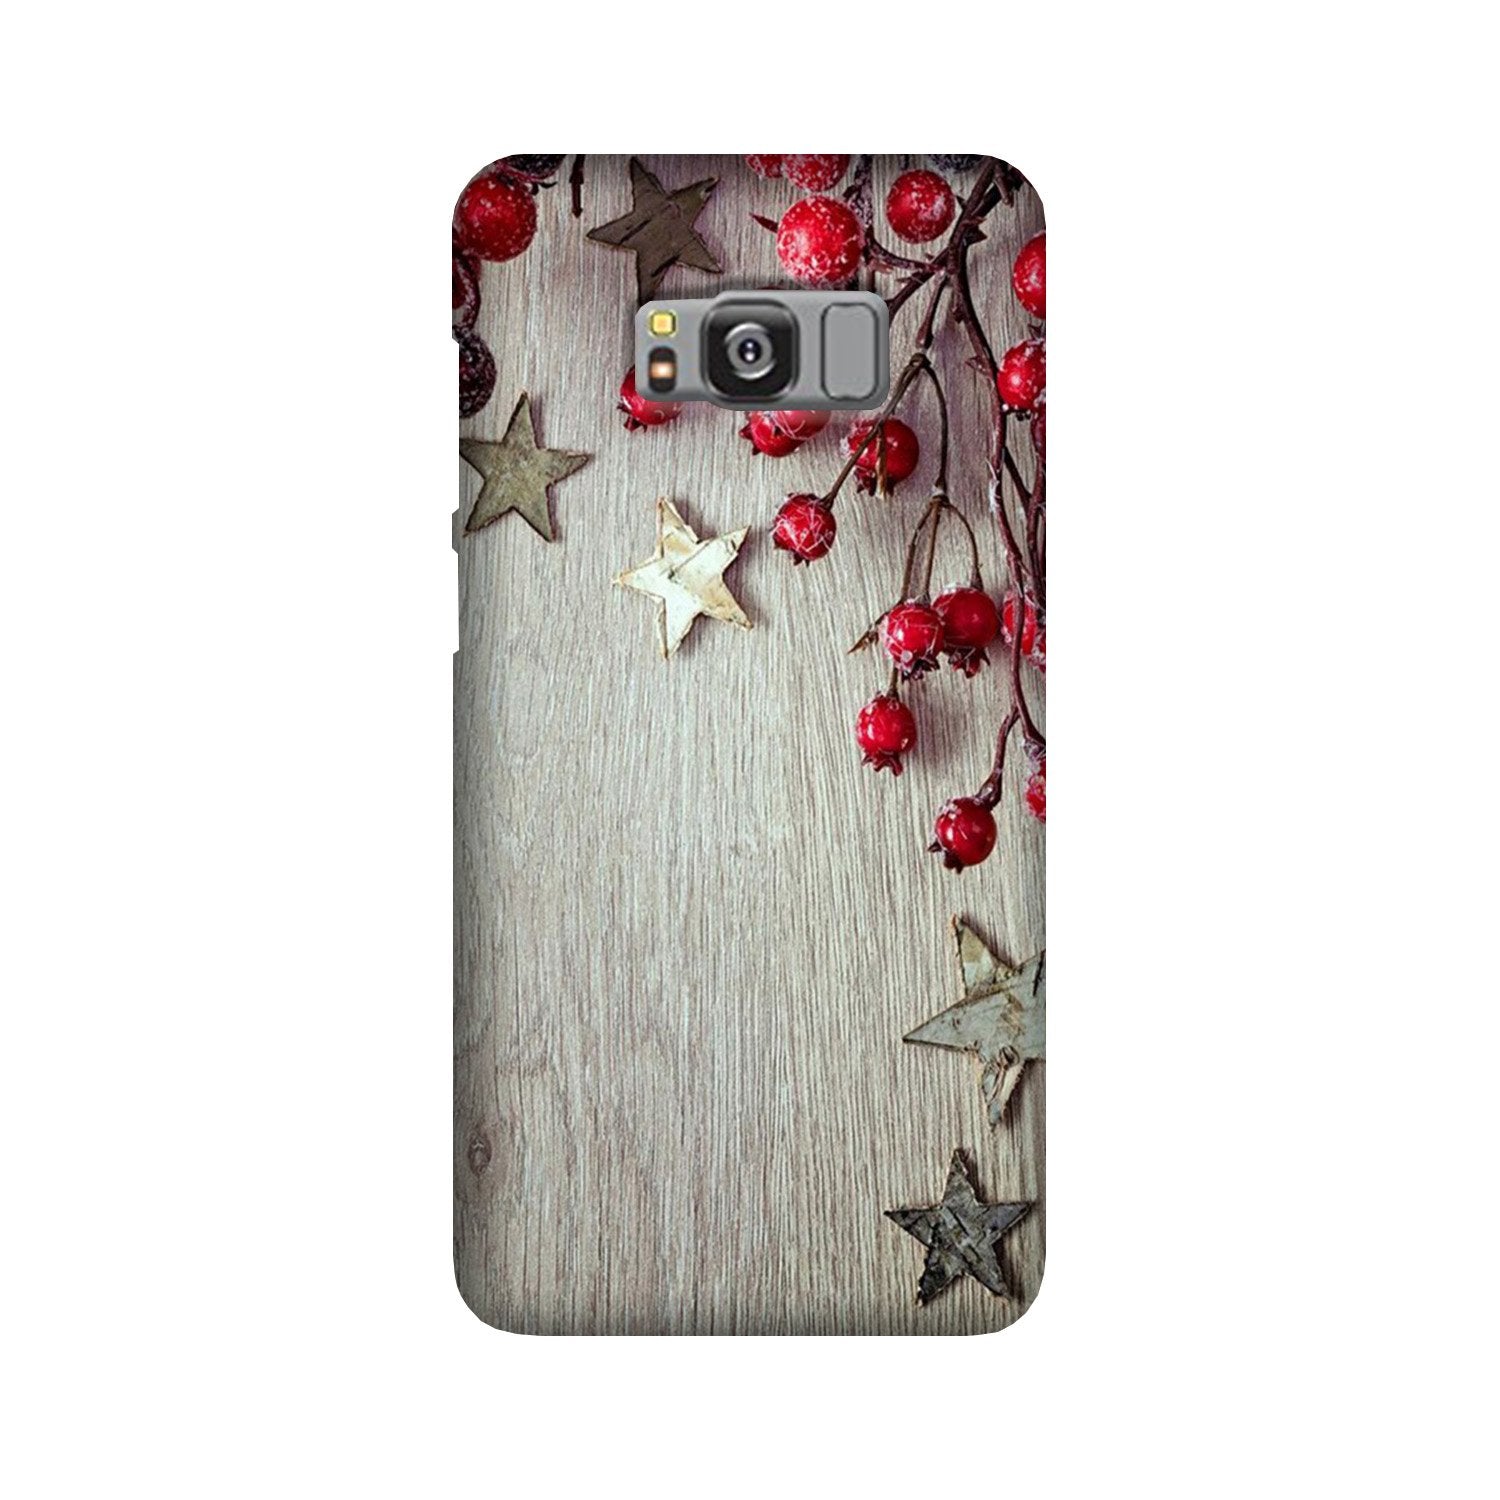 Stars Case for Galaxy S8 Plus